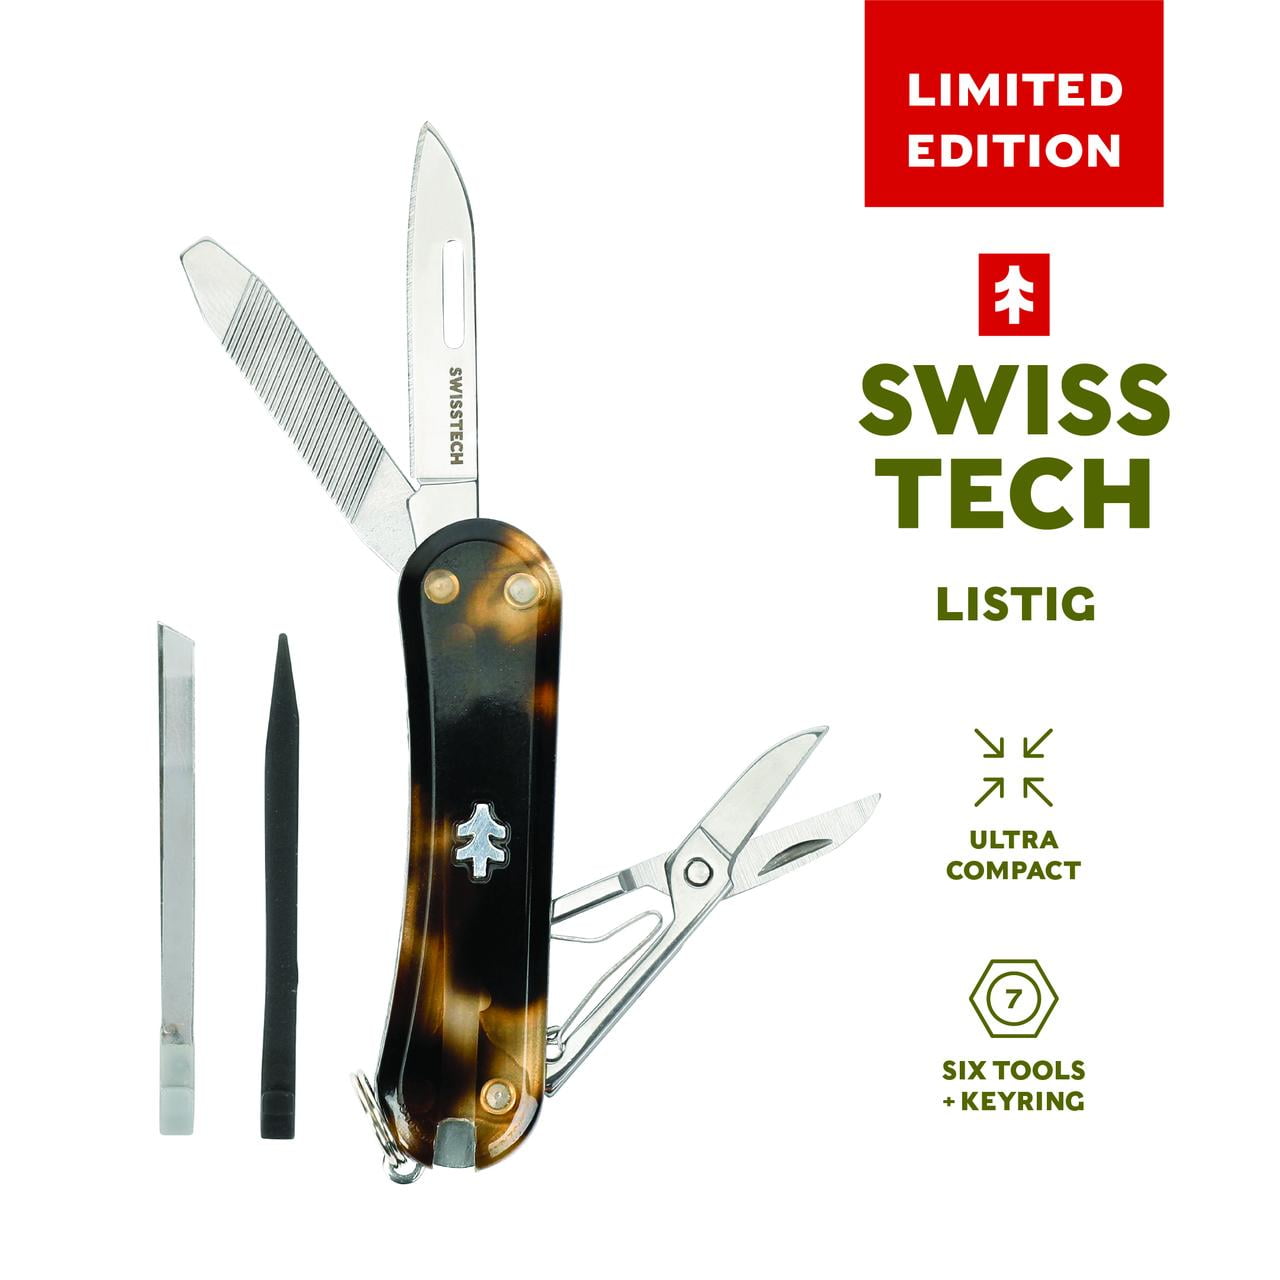 Swiss Tech Listig Holiday Limited Edition 7-in-1 Multi Tool, Compact Single  Edge Pocket Knife with Scissors, Acetate Handle 